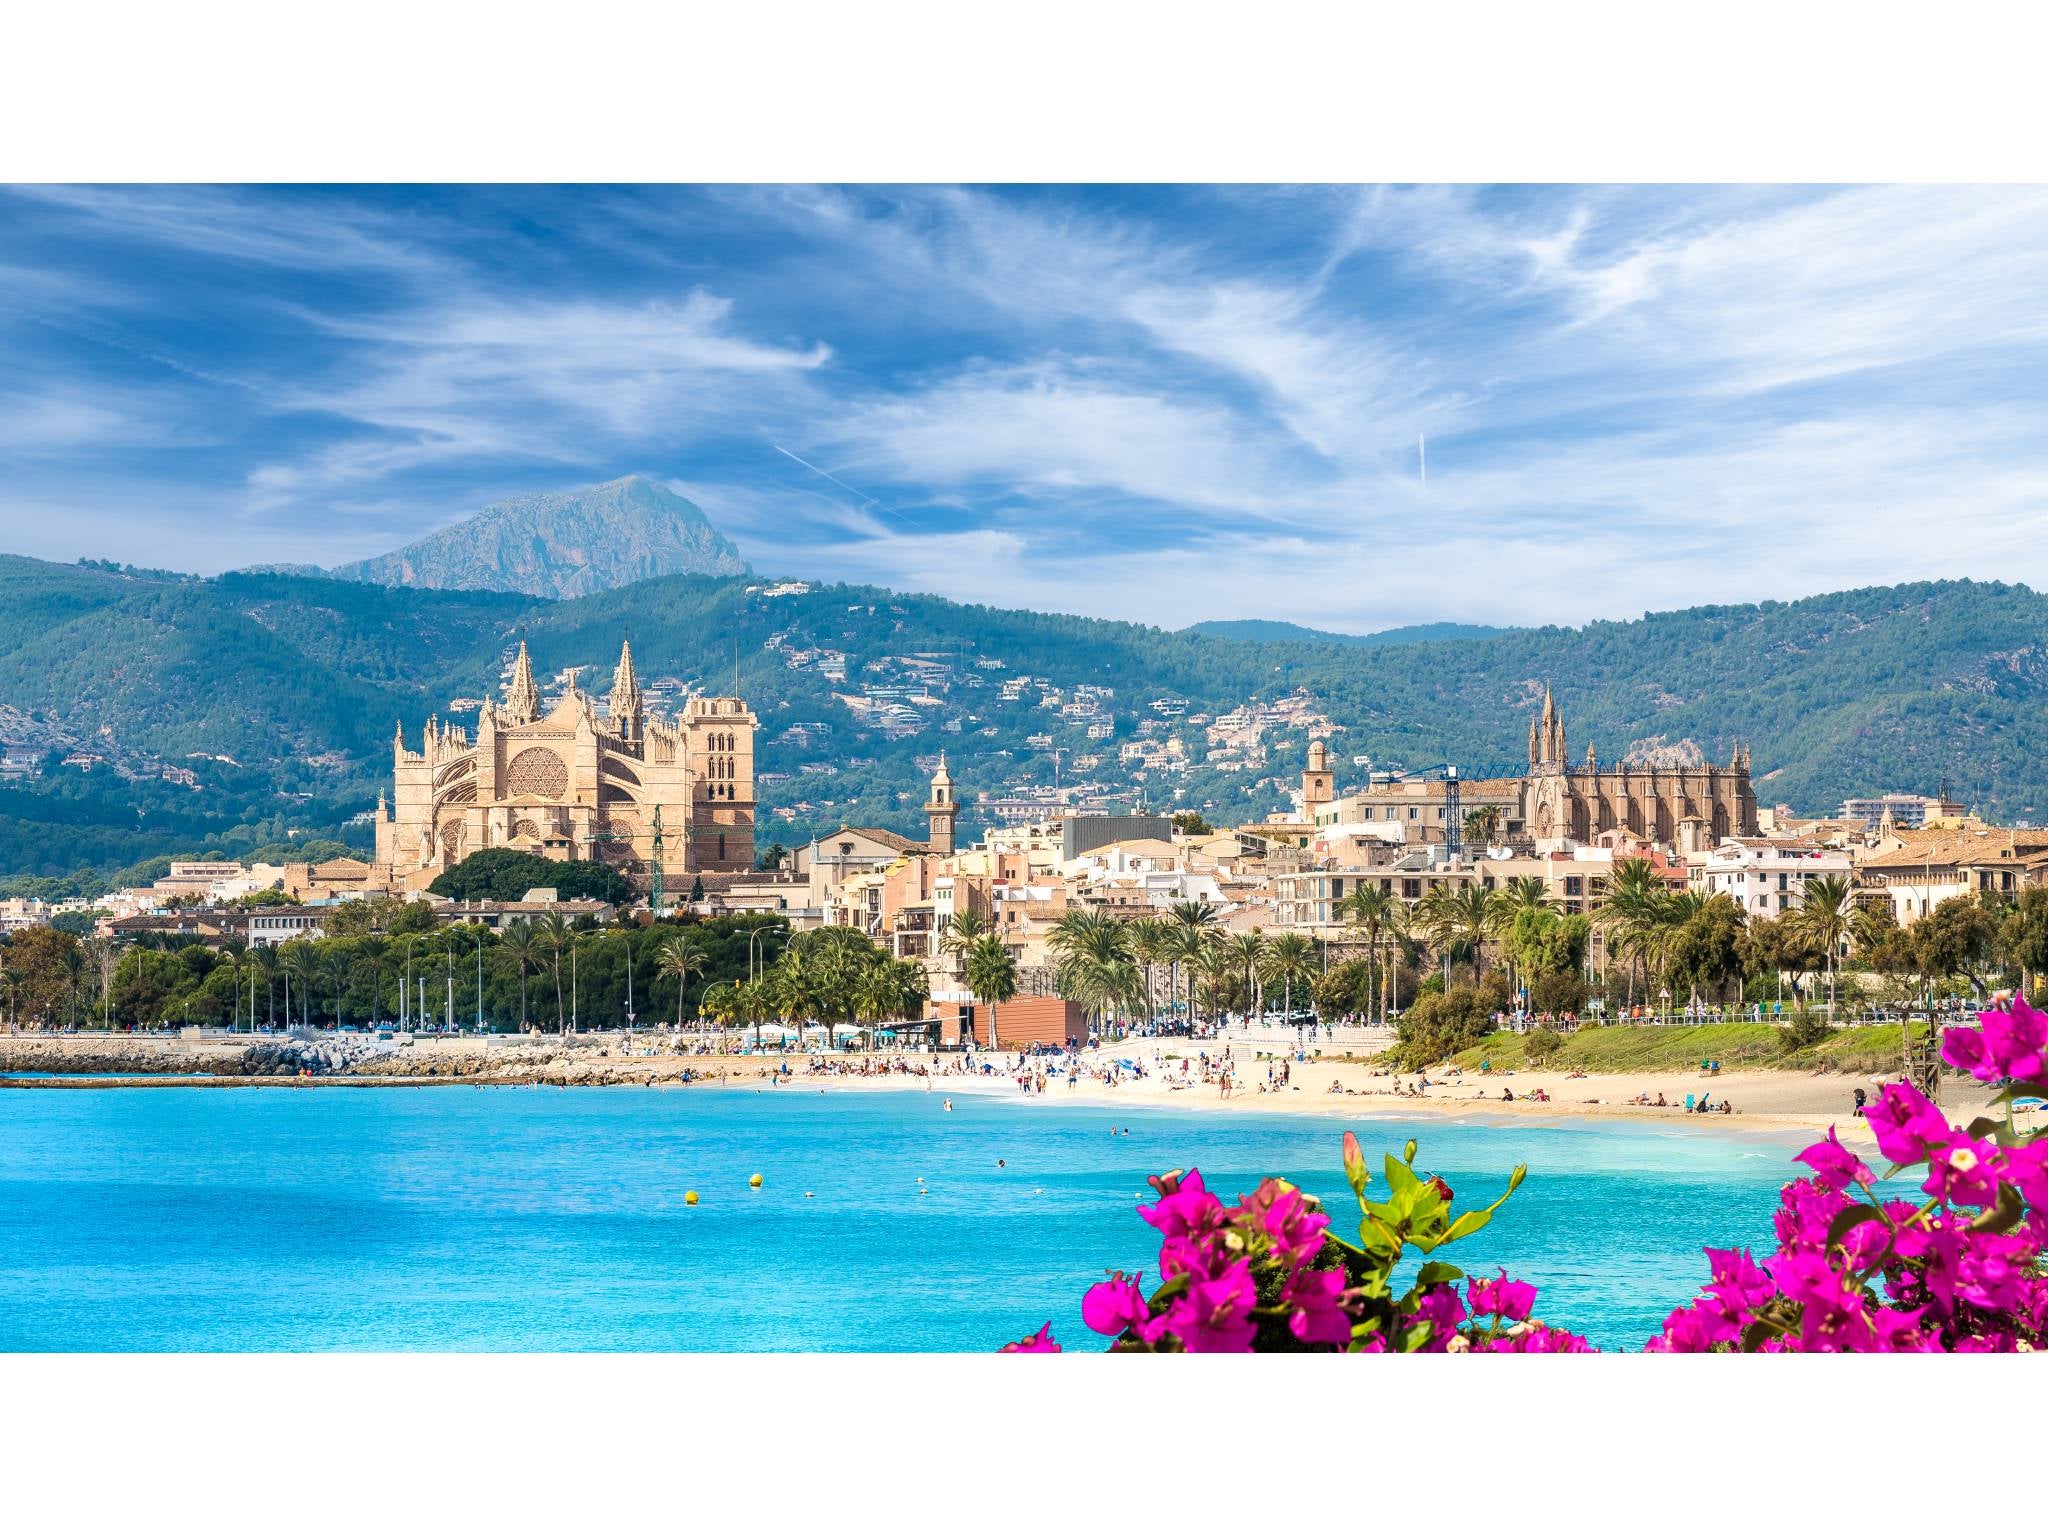 Holidays to Mallorca have the biggest price difference, and could save a family of four up to £1,100